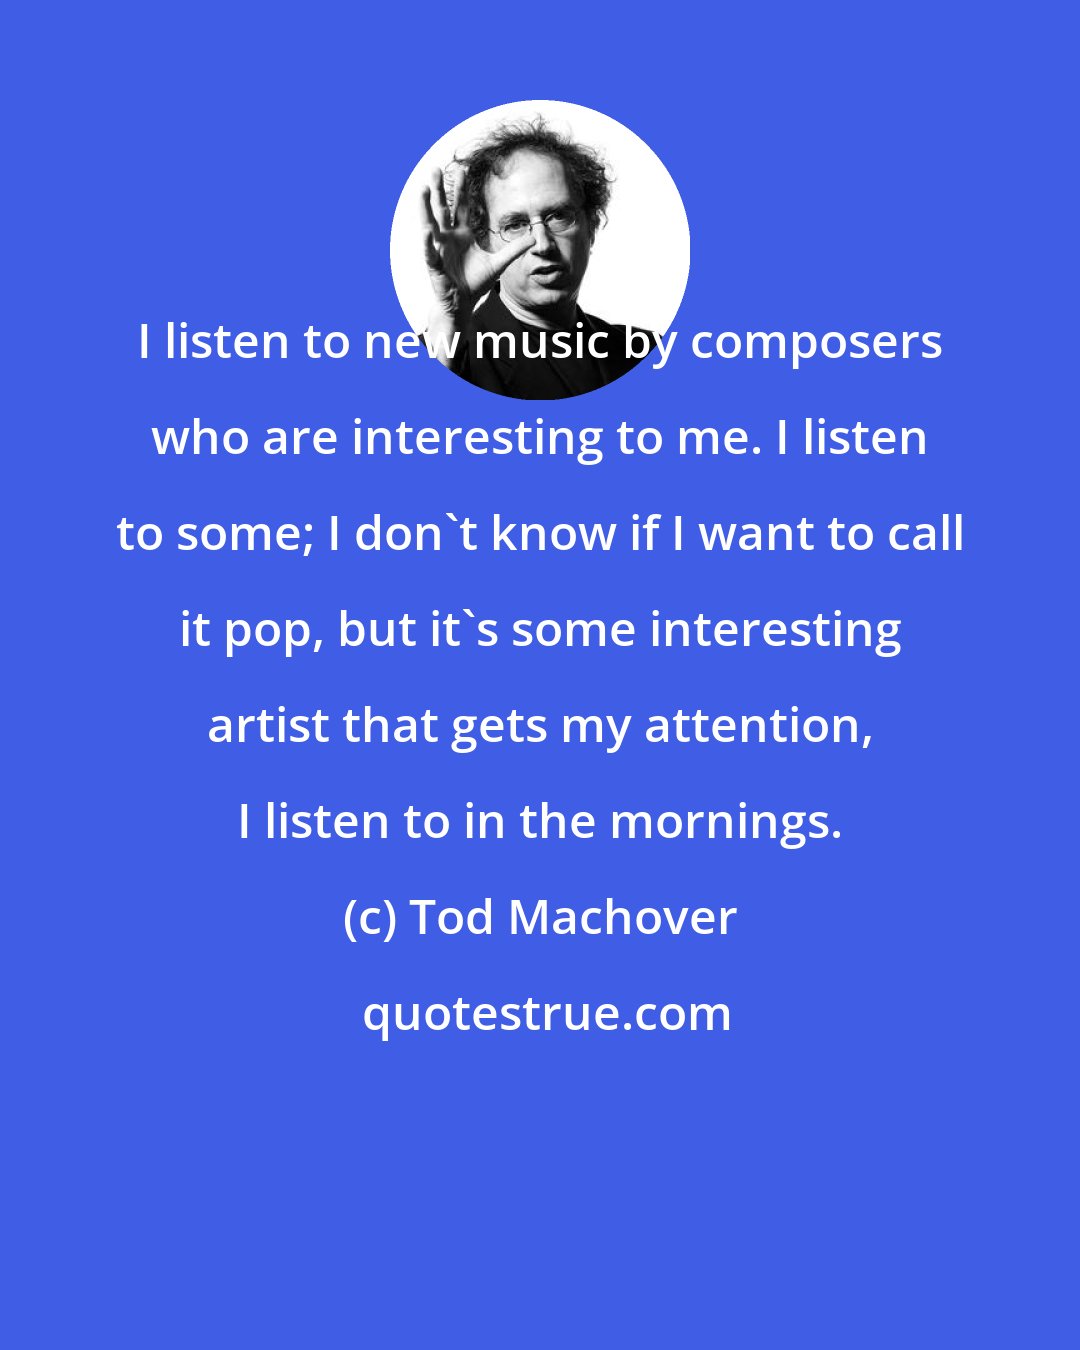 Tod Machover: I listen to new music by composers who are interesting to me. I listen to some; I don't know if I want to call it pop, but it's some interesting artist that gets my attention, I listen to in the mornings.